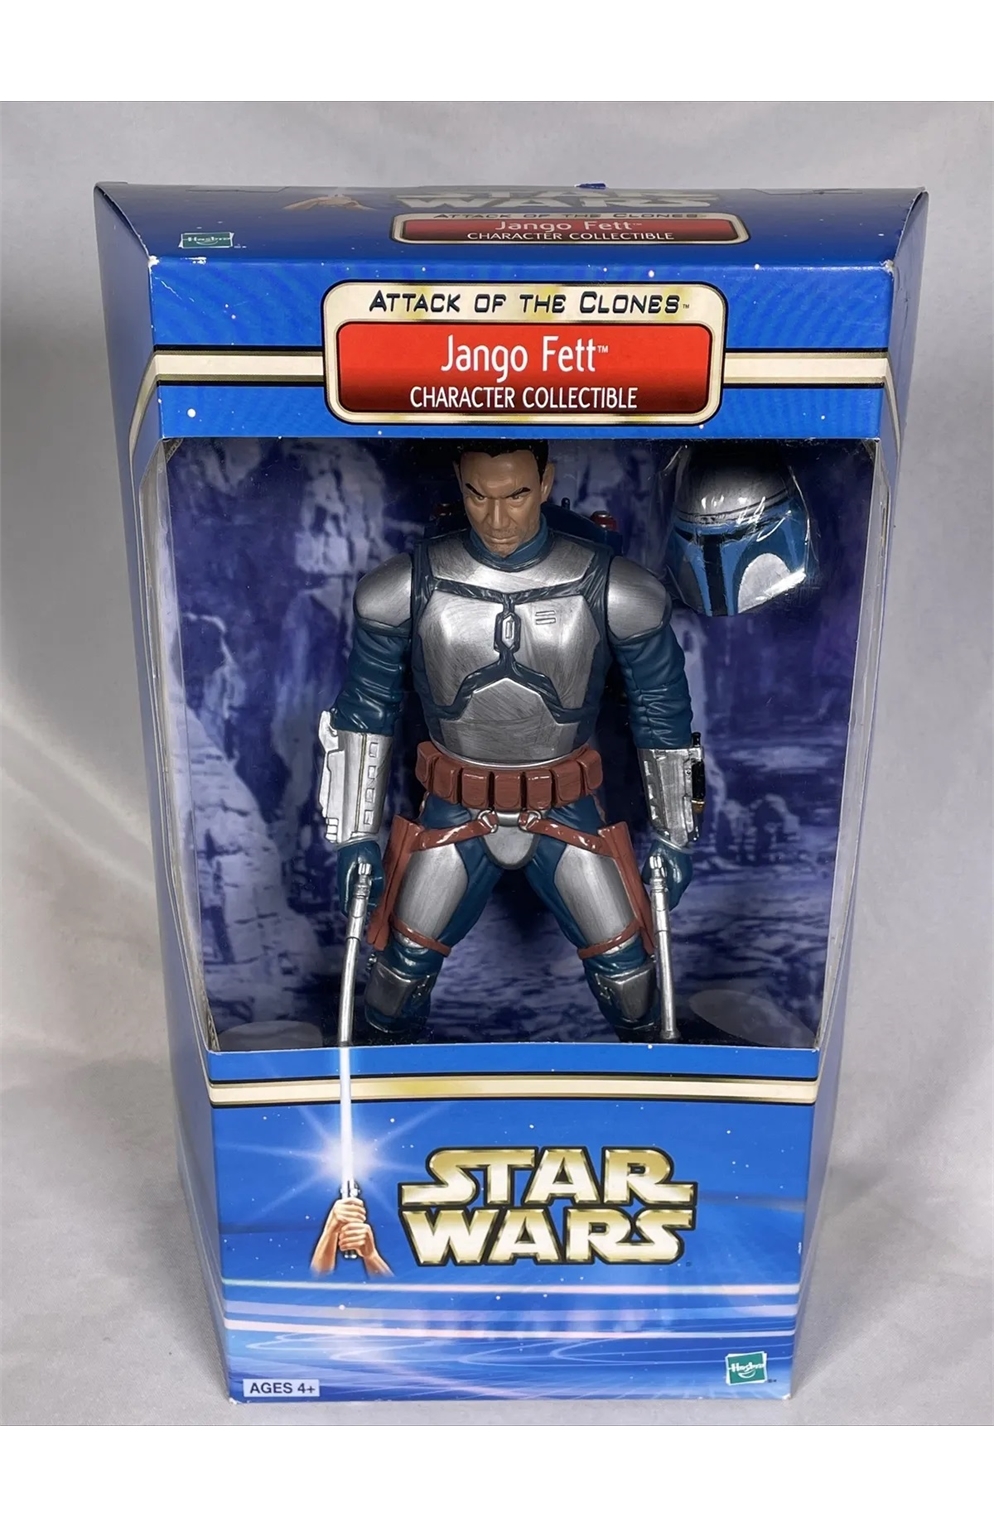 Star Wars Attack of The Clone Character Collectible Jango Fett